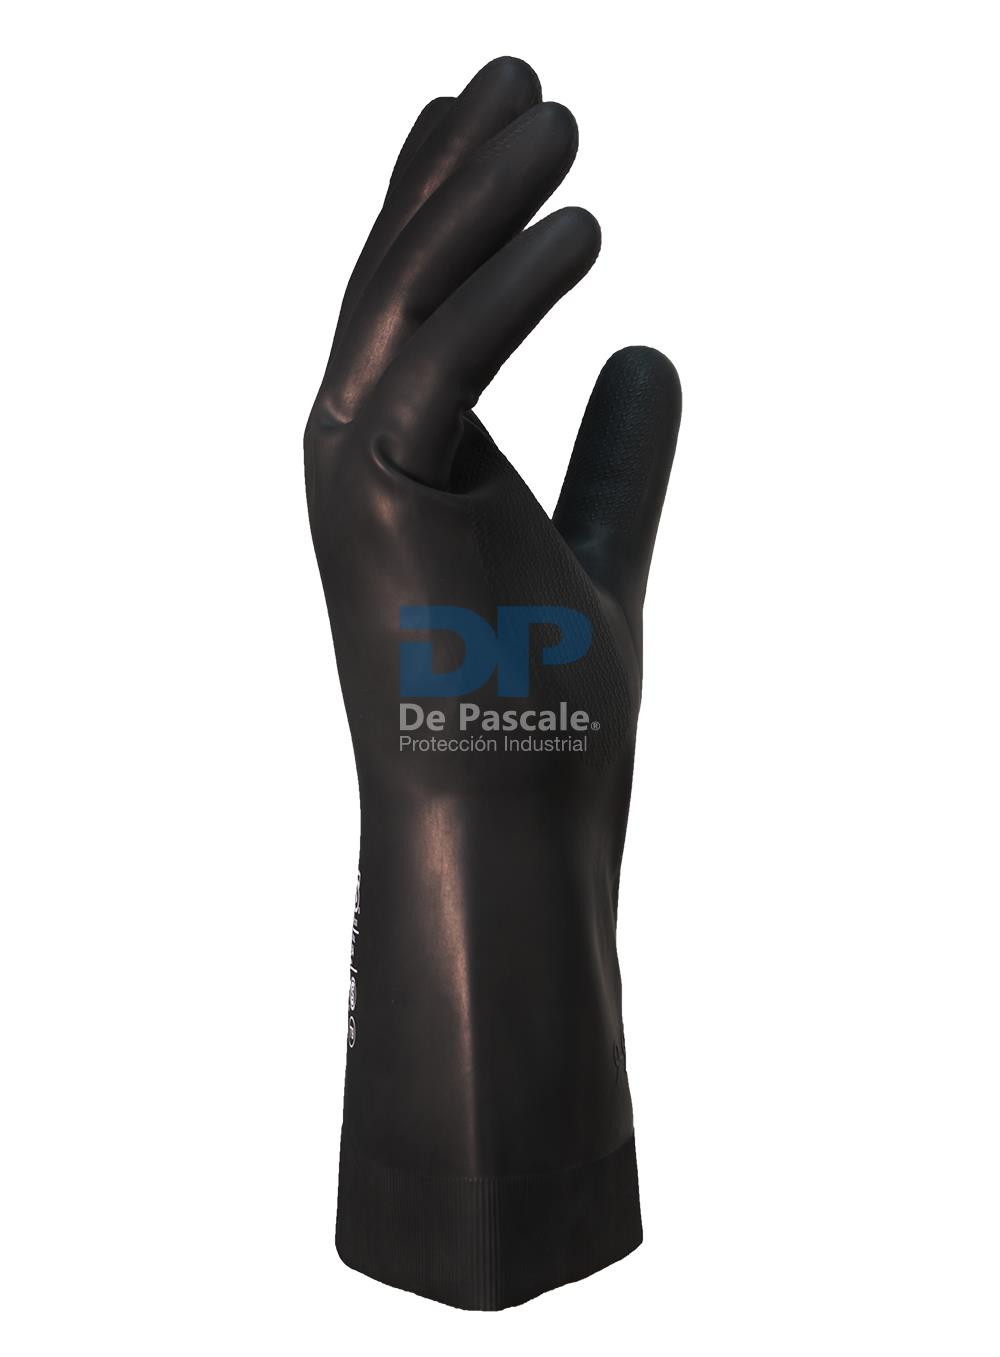 GUANTE LATEX NEGRO DEPASCALE TALLE 8 DPS71393